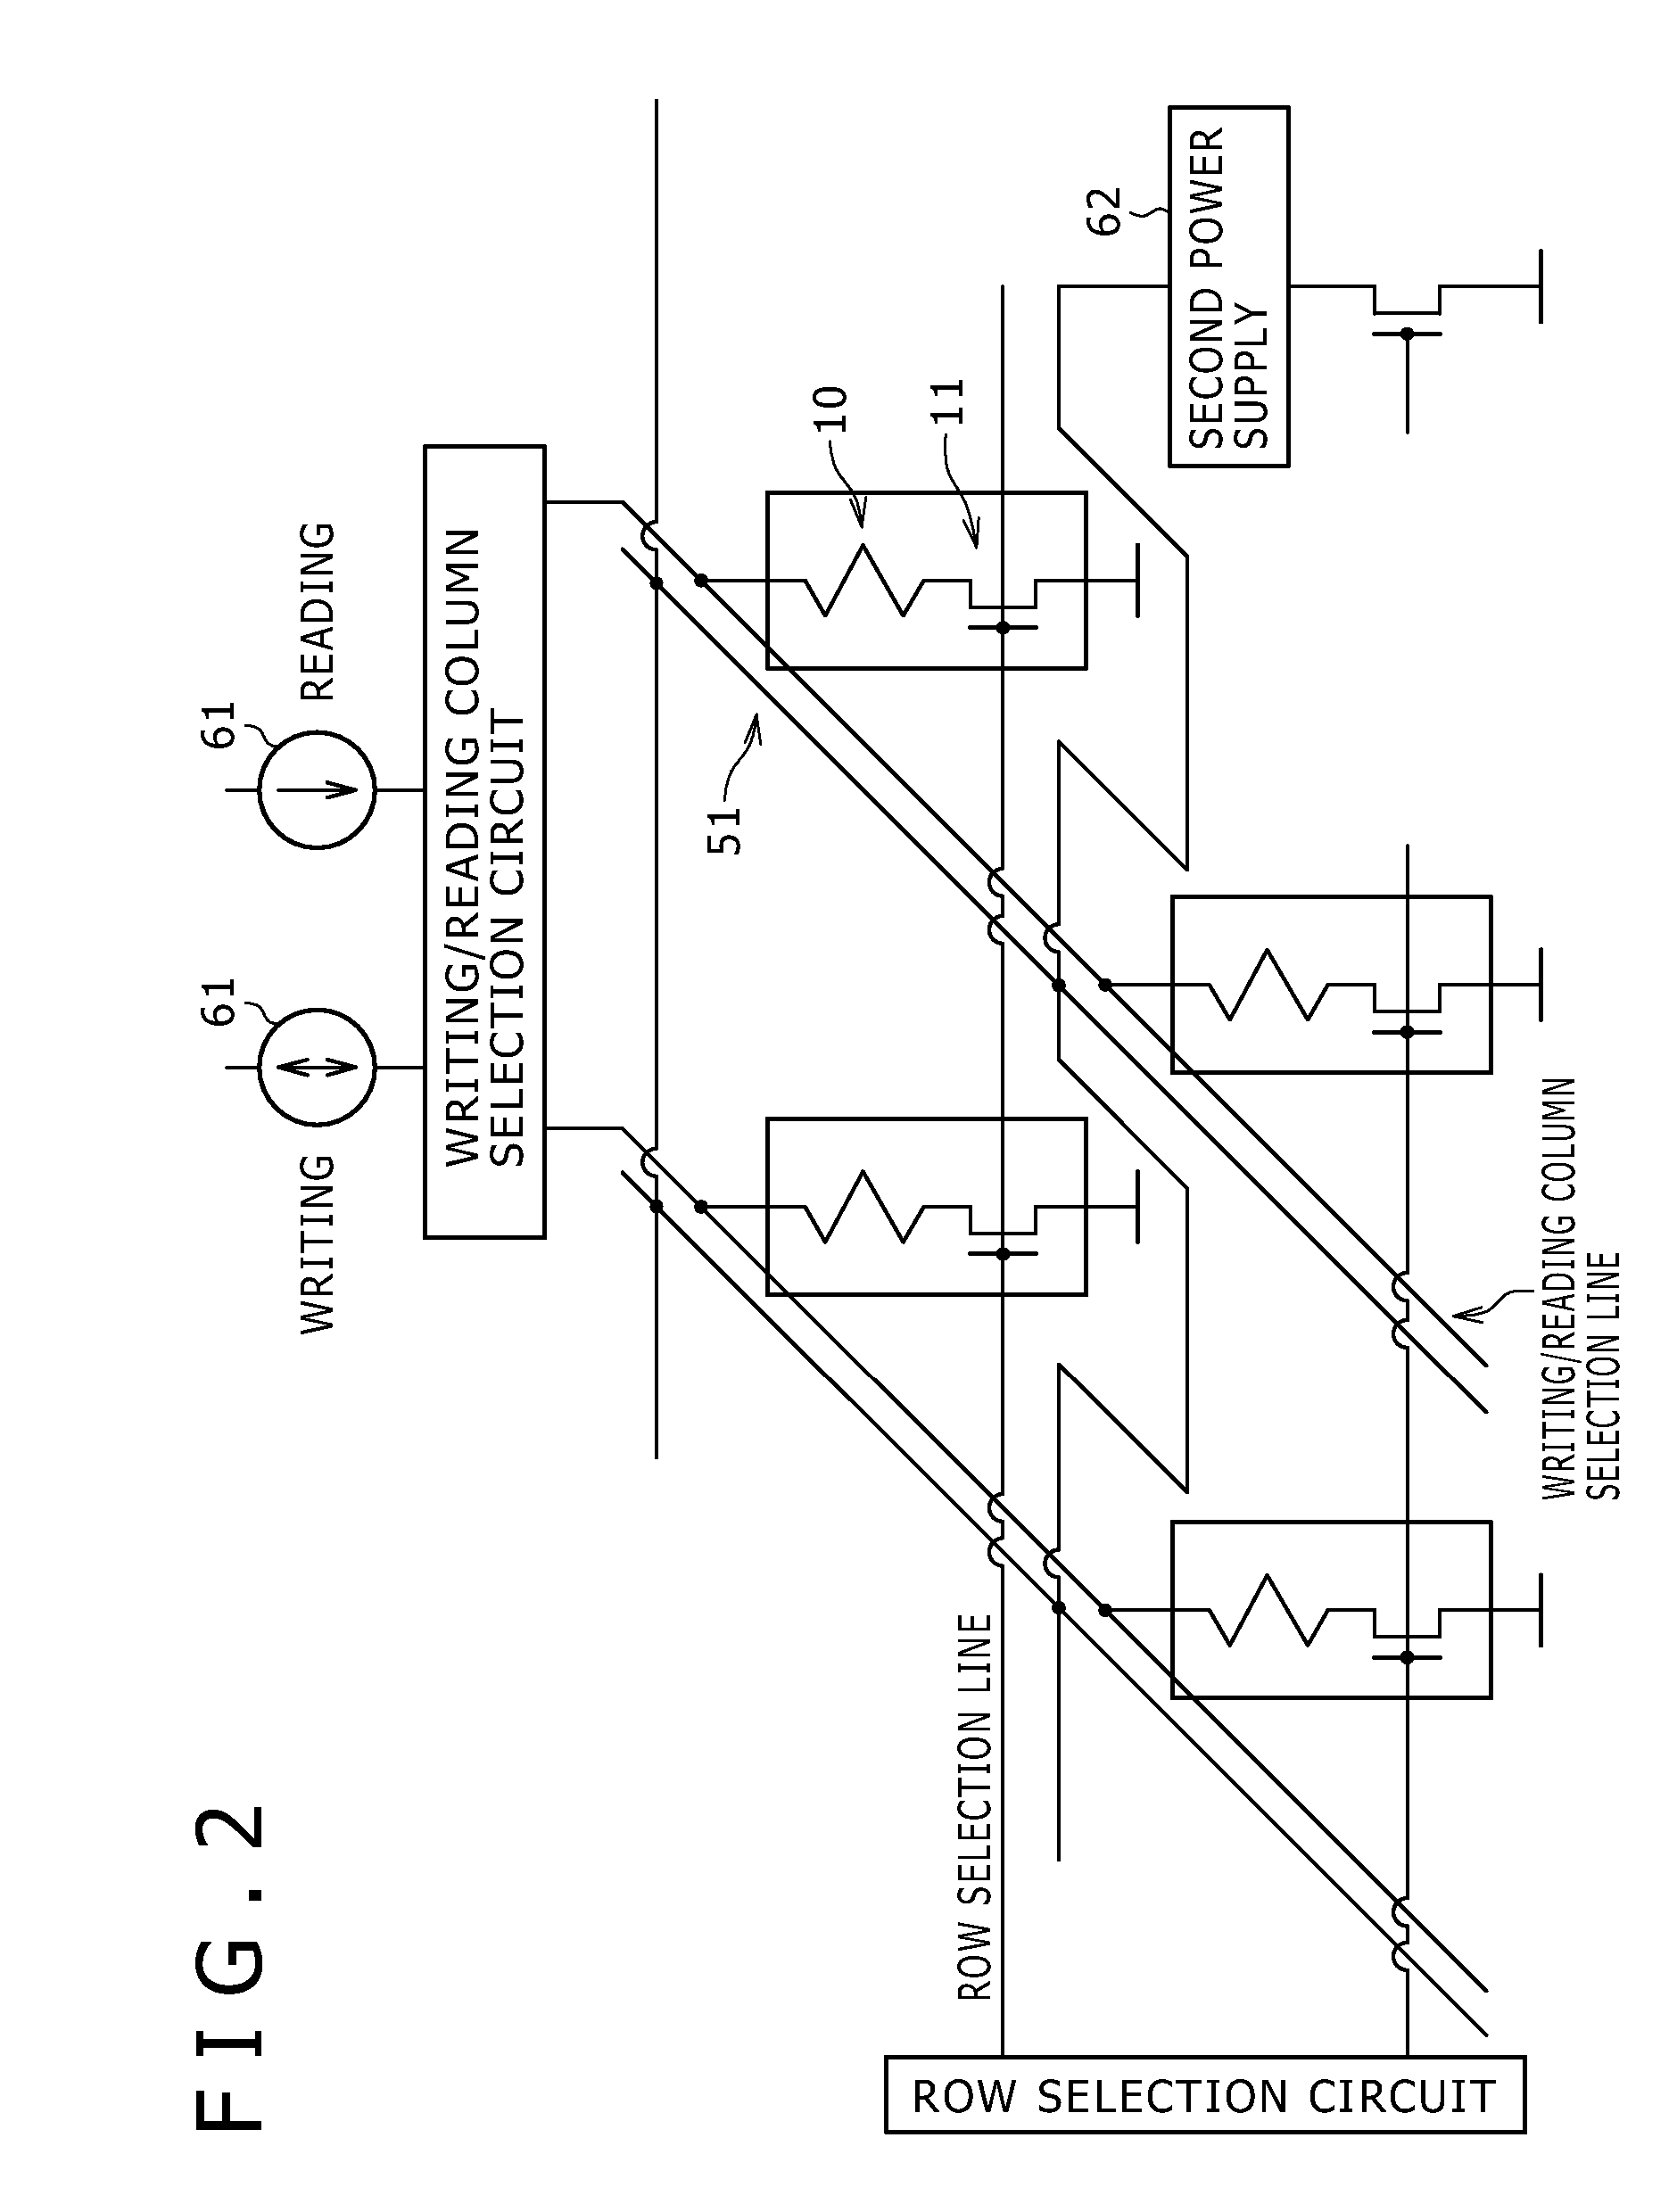 Spin-injection magnetoresistance effect element